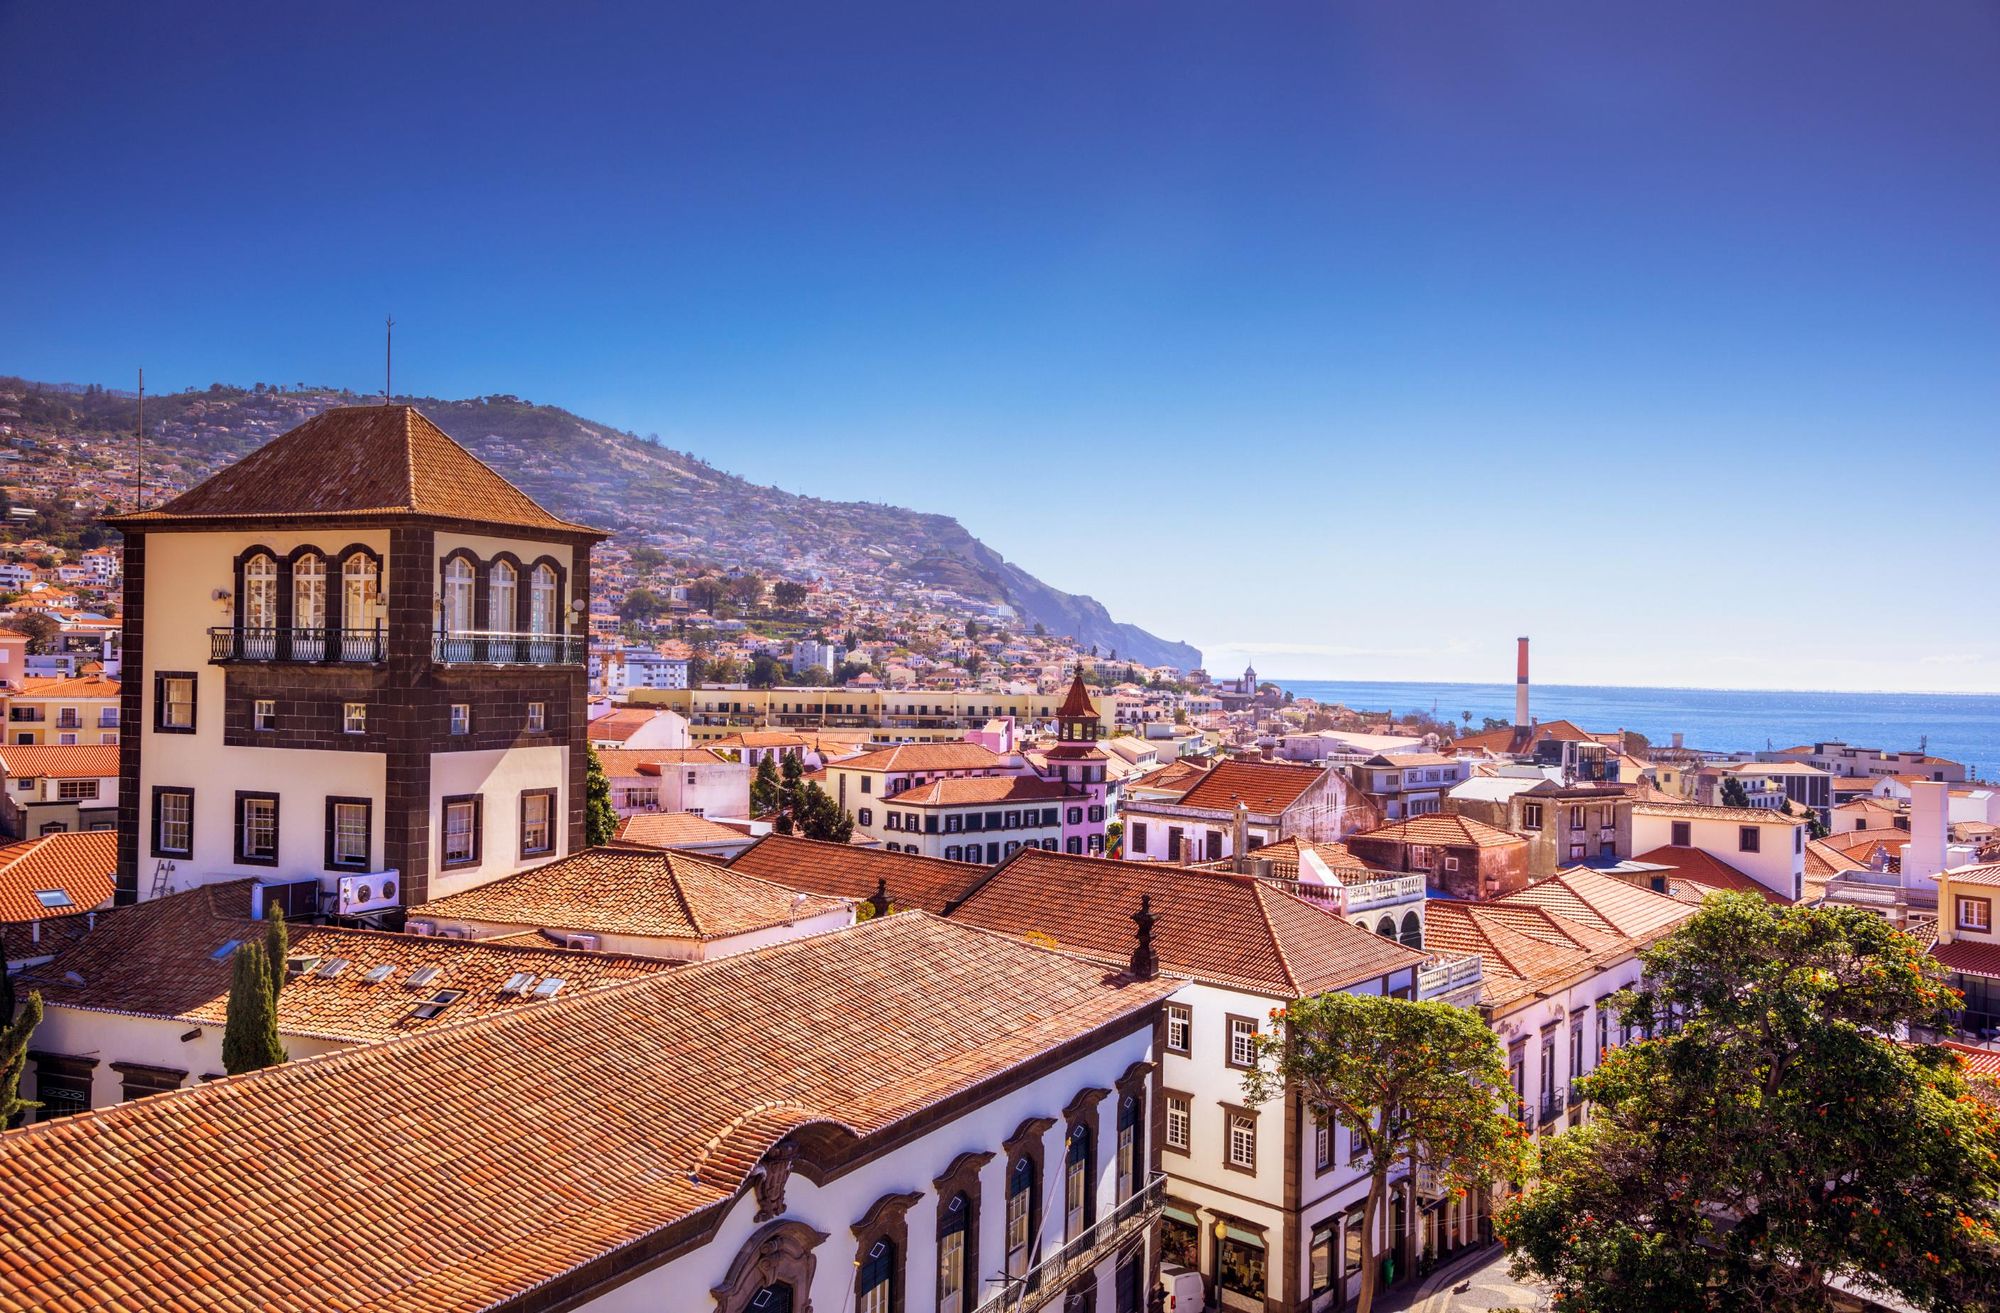 The rooftops of the city of Funchal in Madeira. Photo: Getty